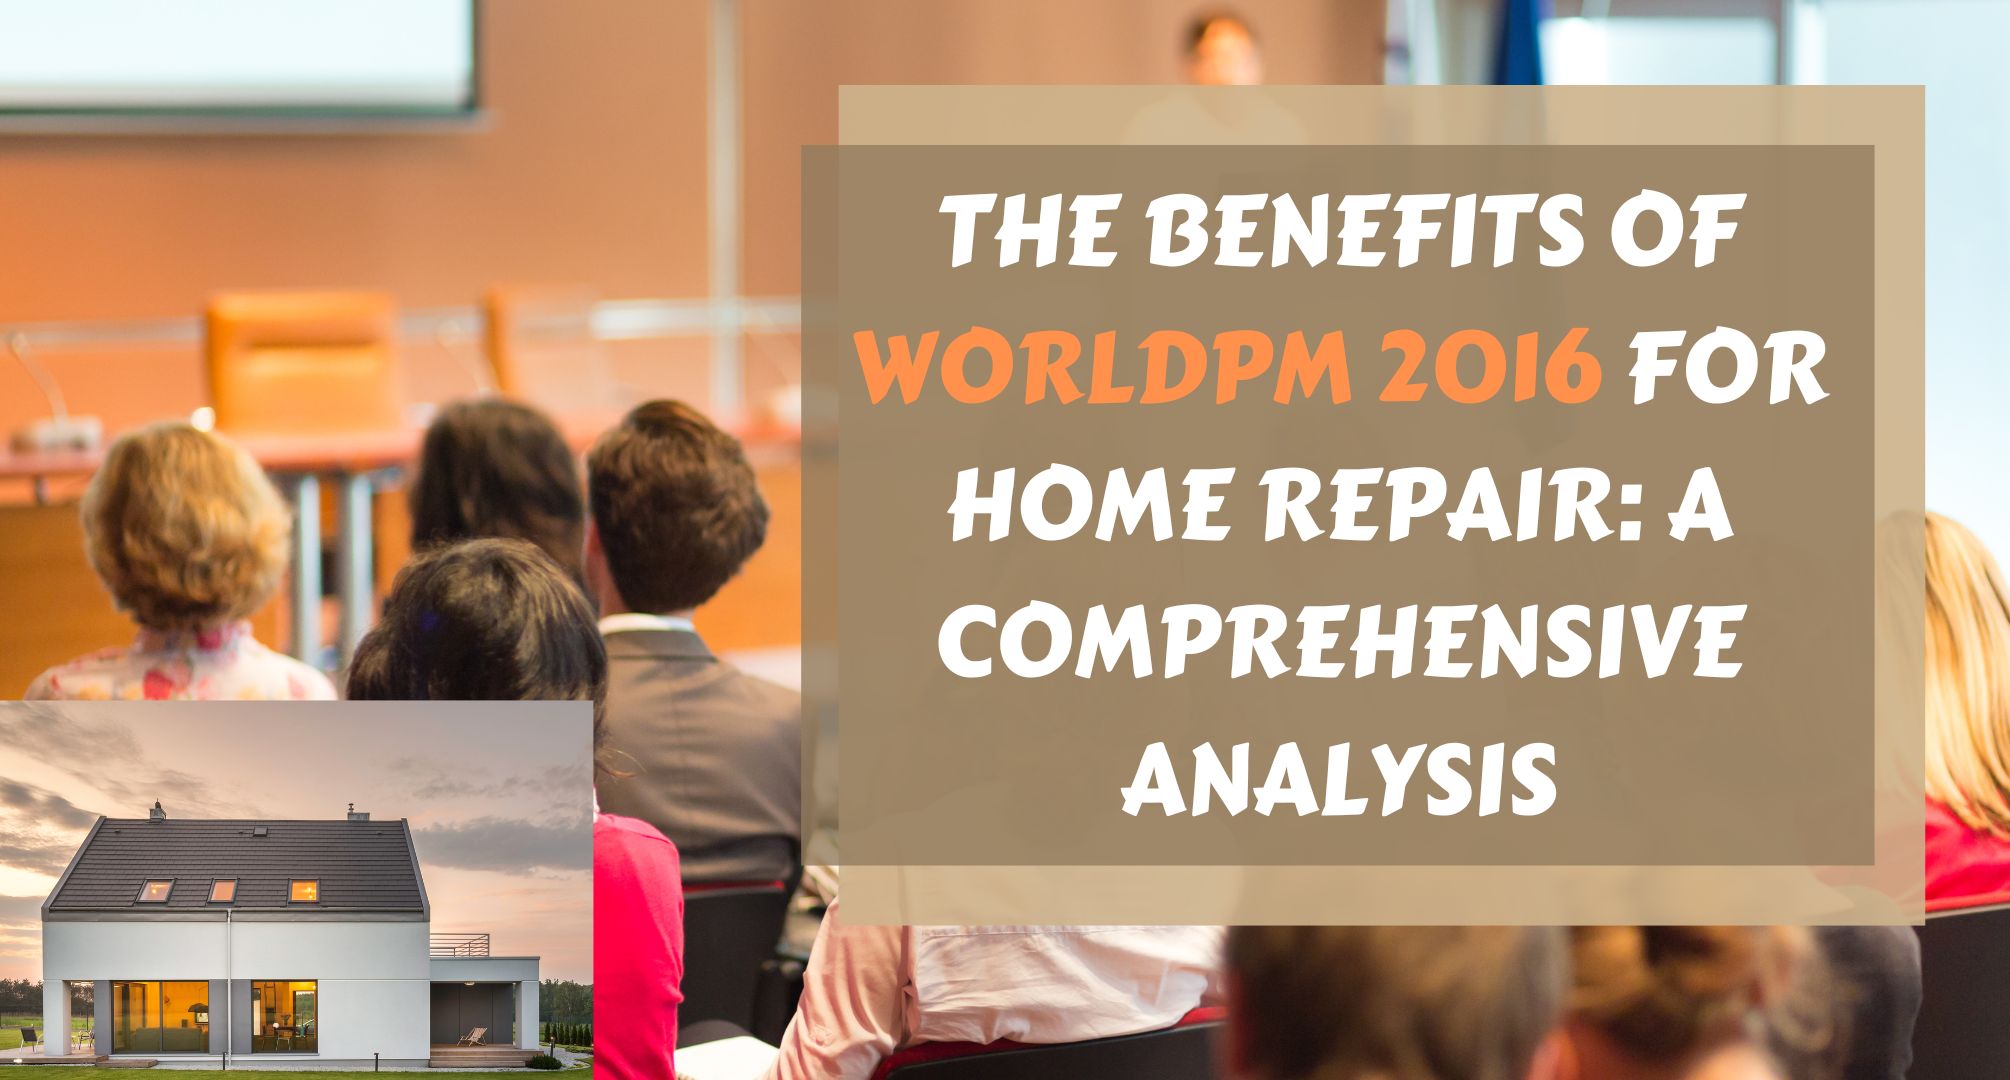 The Benefits of WorldPM 2016 for Home Repair A Comprehensive Analysis